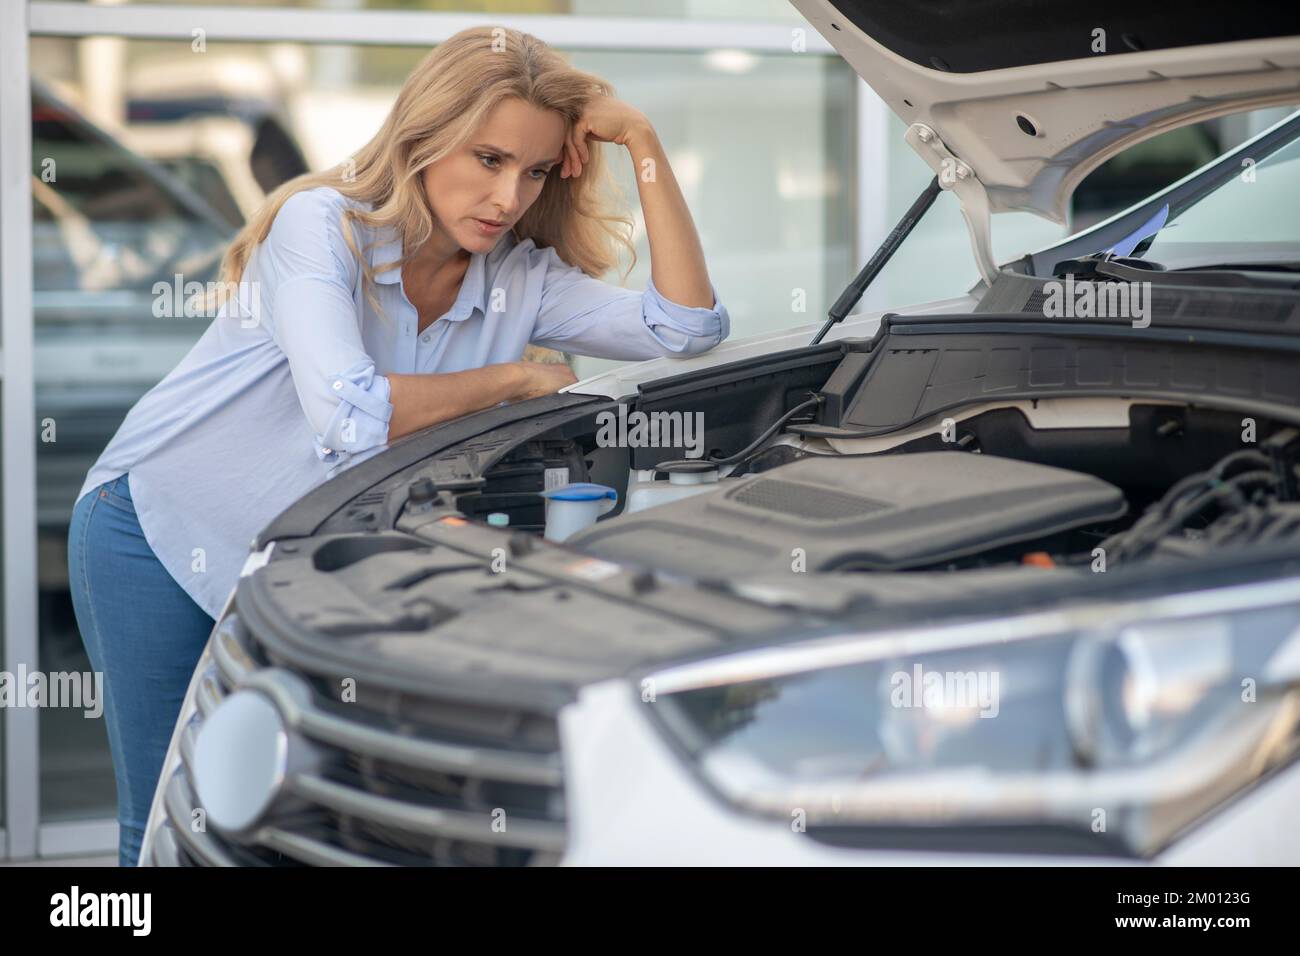 Male Hand Touches the Female Knee. Stock Photo - Image of automobile,  relationship: 43432340